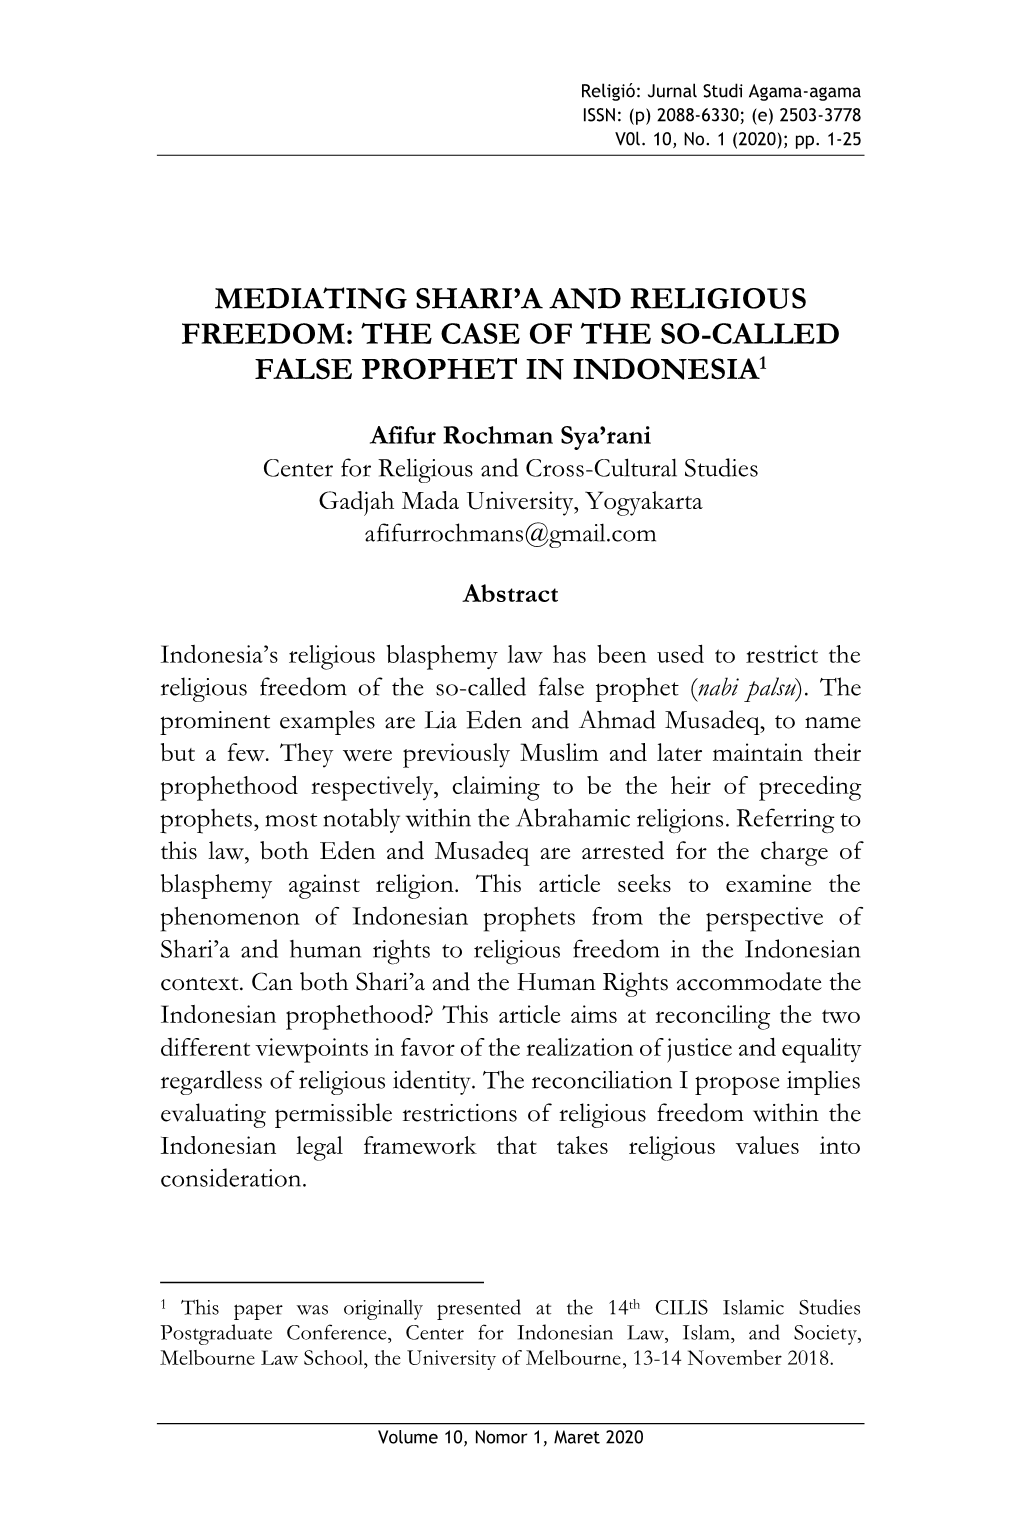 Mediating Shari'a and Religious Freedom: the Case